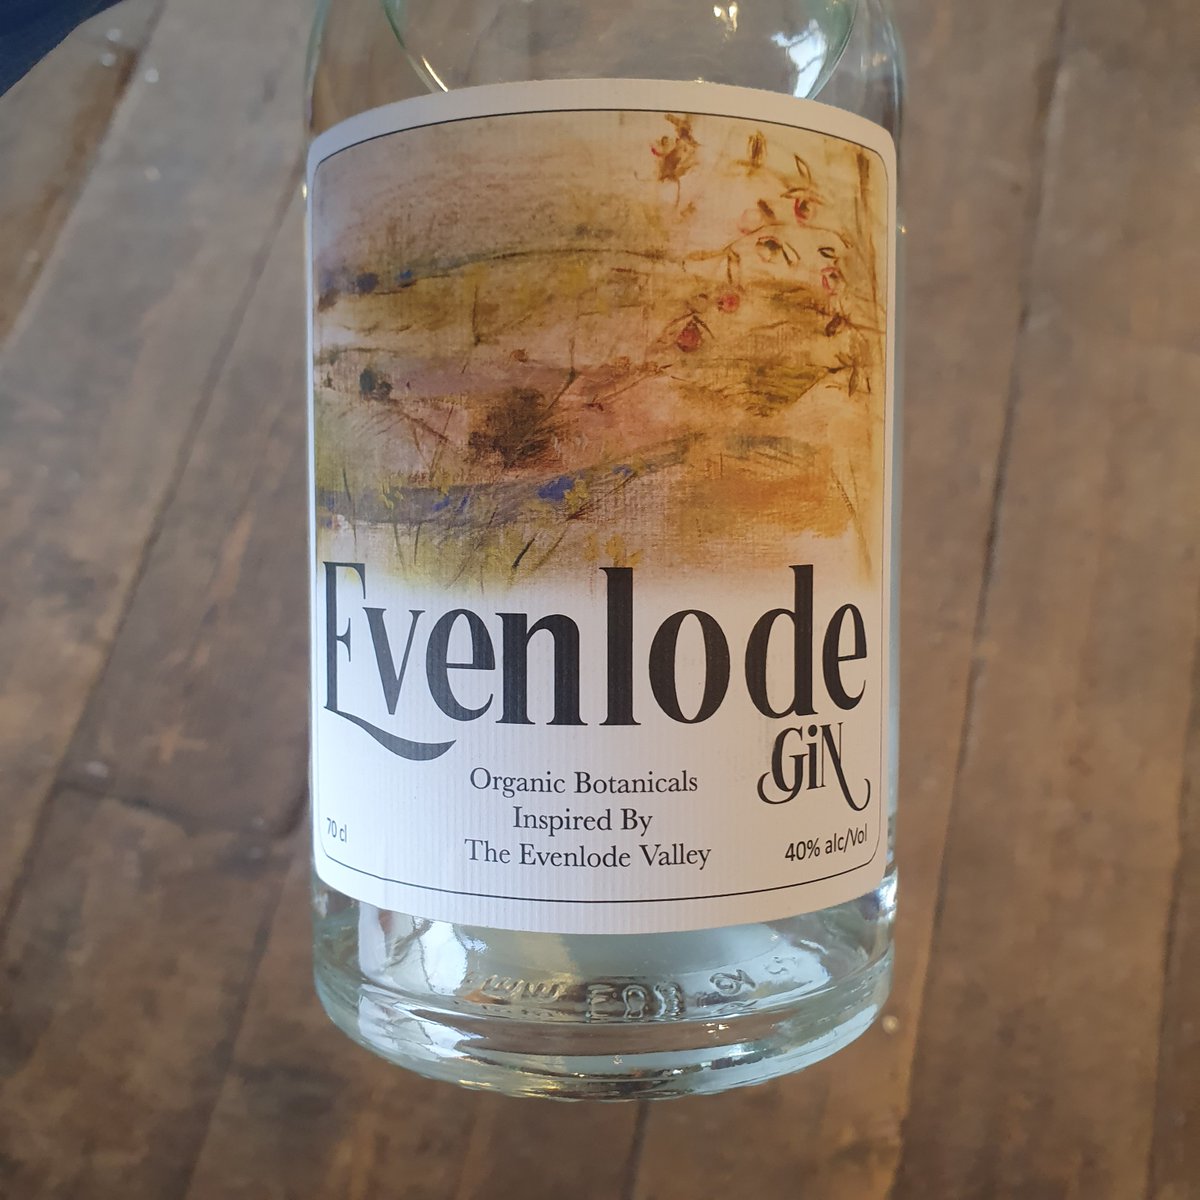 First taste of Evenlode Gin, inspired by the Evenlode Valley. Love this! Lovely fresh citrus and floral notes.
Recently launched and available from Café de la Post and The Tite Inn in Chadlington, also at The Charlbury Deli. #gin #londondrygin #organicbotancials #cotswoldlife